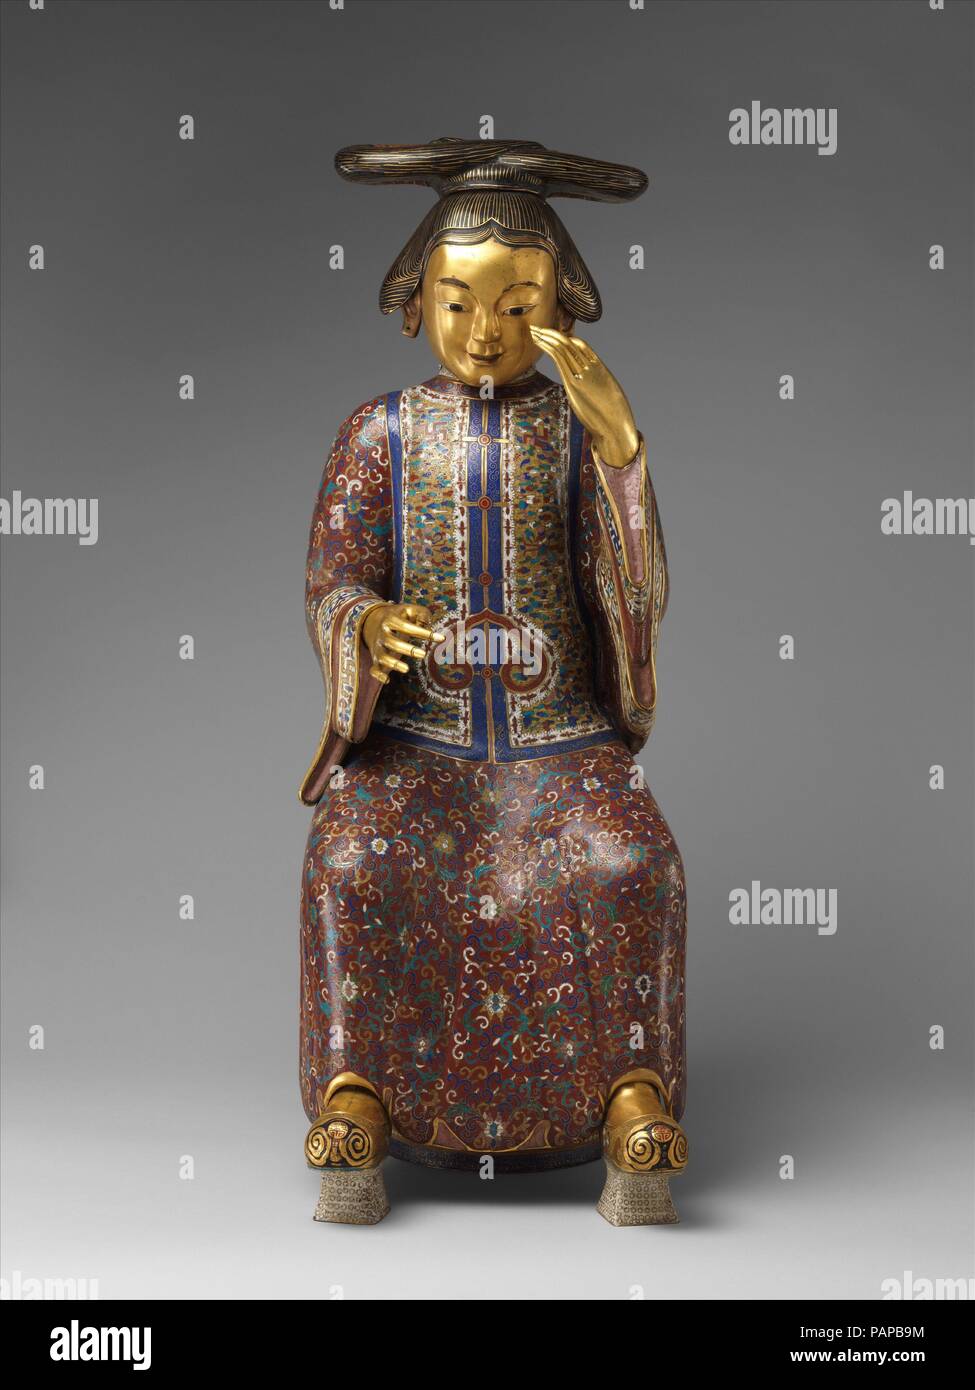 Seated Figure (one of a pair). Culture: China. Dimensions: H. 36 in. (91.4 cm); W. 13 in. (33 cm); D. 17 1/2 in. (44.5 cm). Museum: Metropolitan Museum of Art, New York, USA. Stock Photo